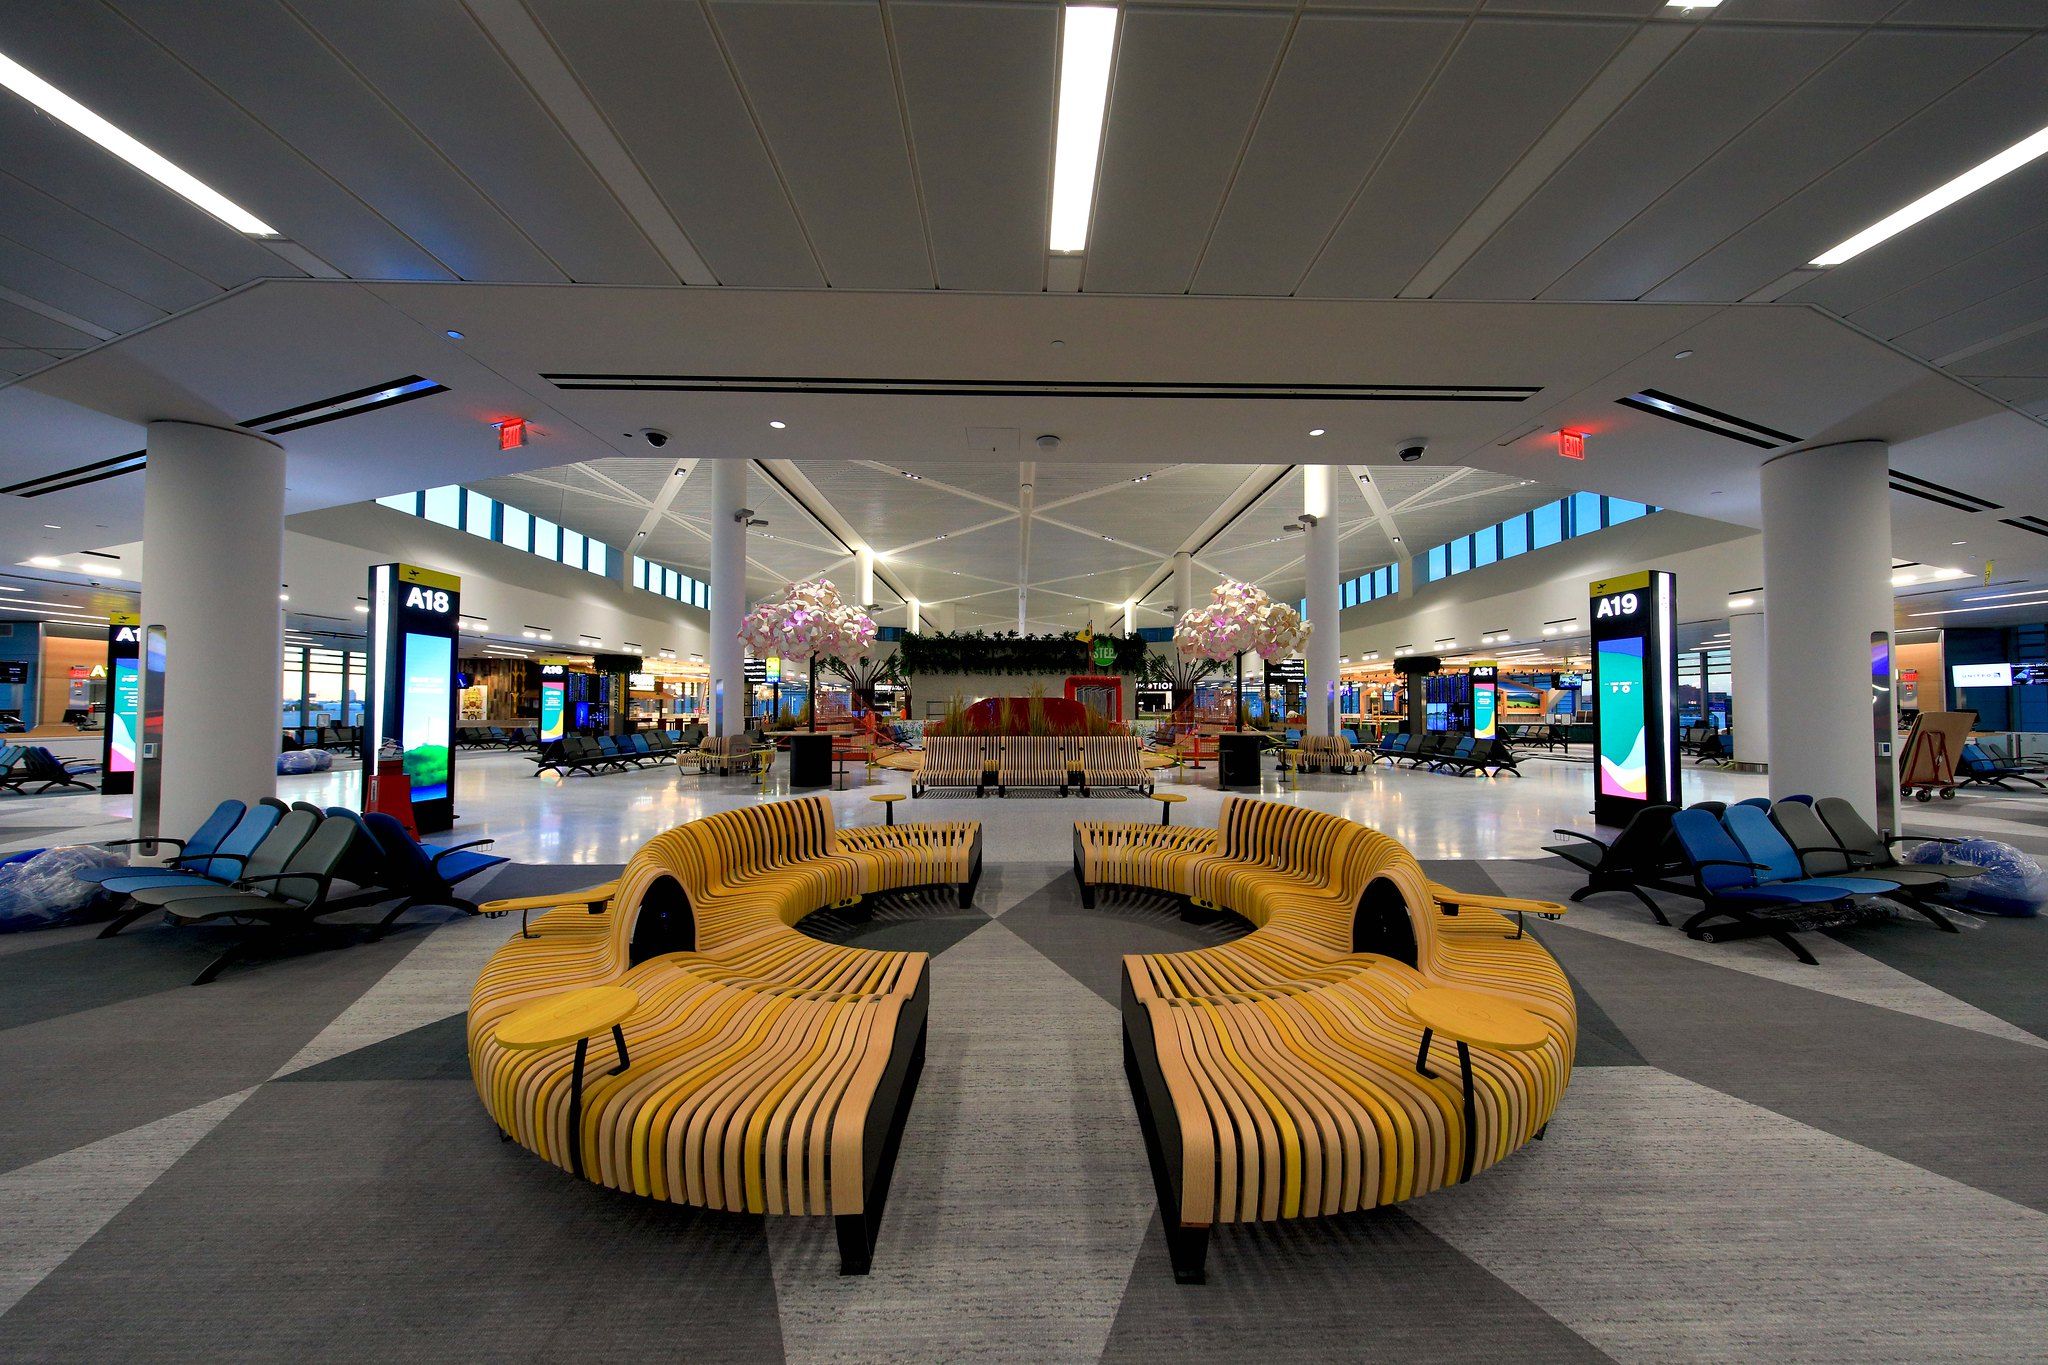 Interior of a terminal building with a circular yellow seating area and several lounge chairs.